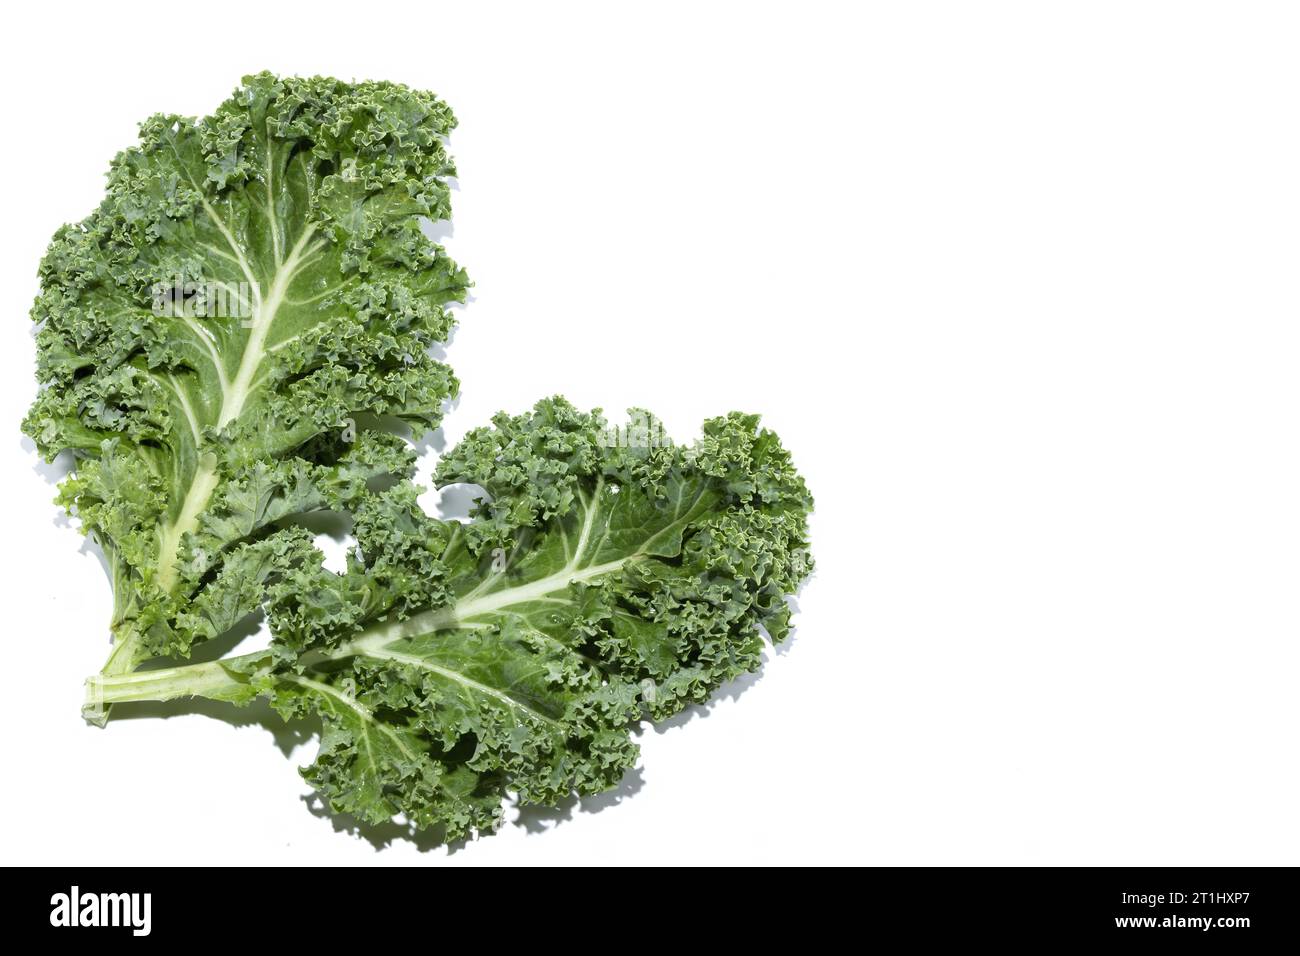 Two green leaves of the super nutritious vegetable called Kale, isolated on white background, copy space Stock Photo